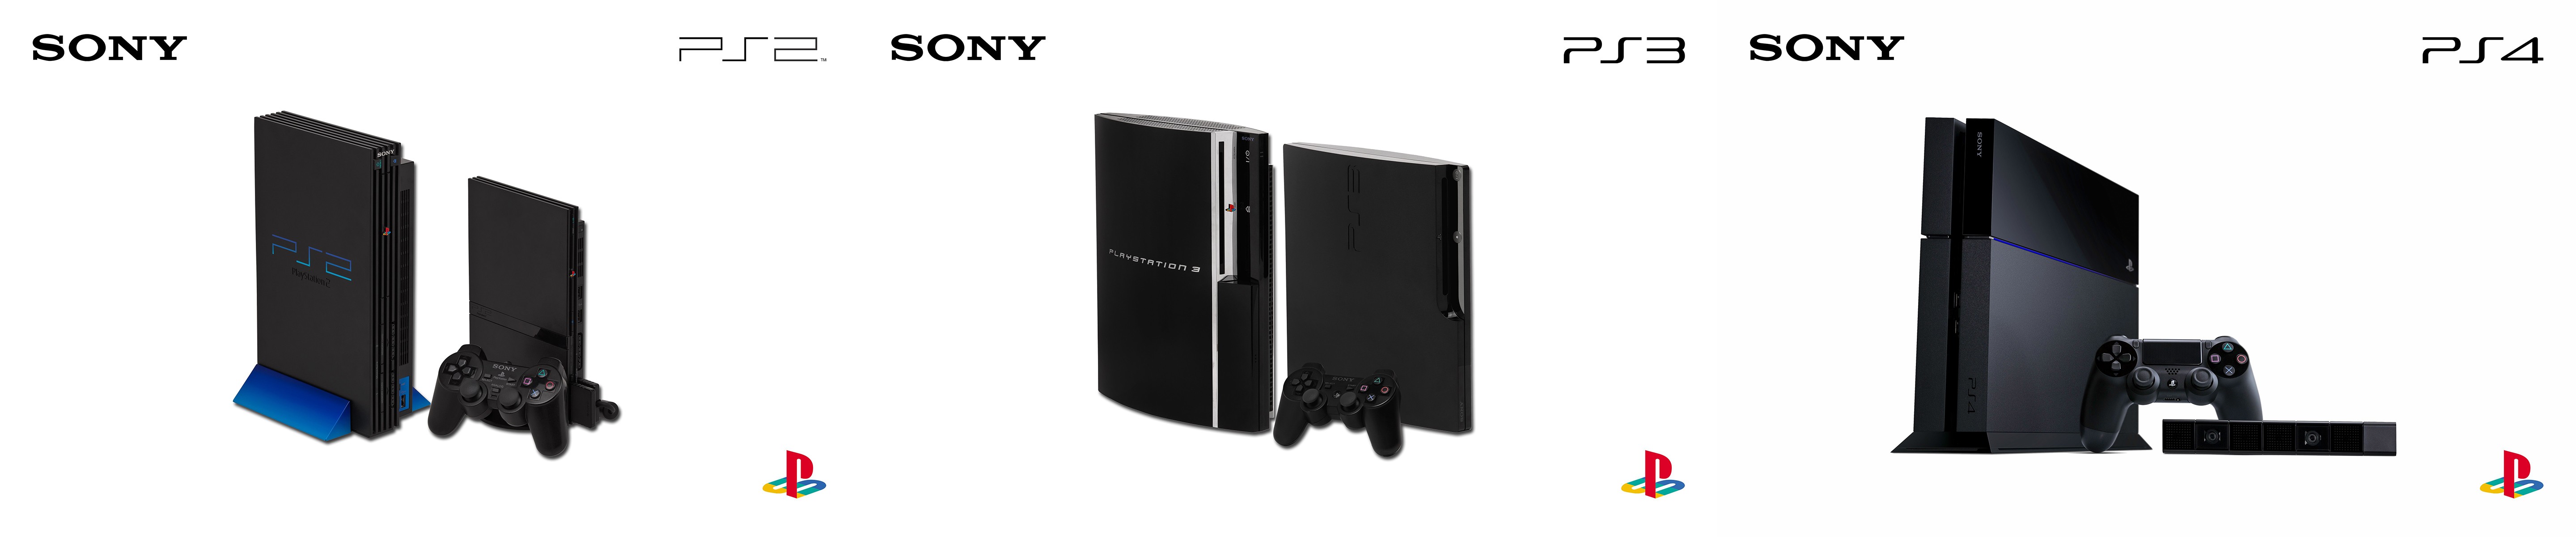 PlayStation PlayStation 2 PlayStation 3 Triple Screen Sony PlayStation 4 Simple Background 5760x1200